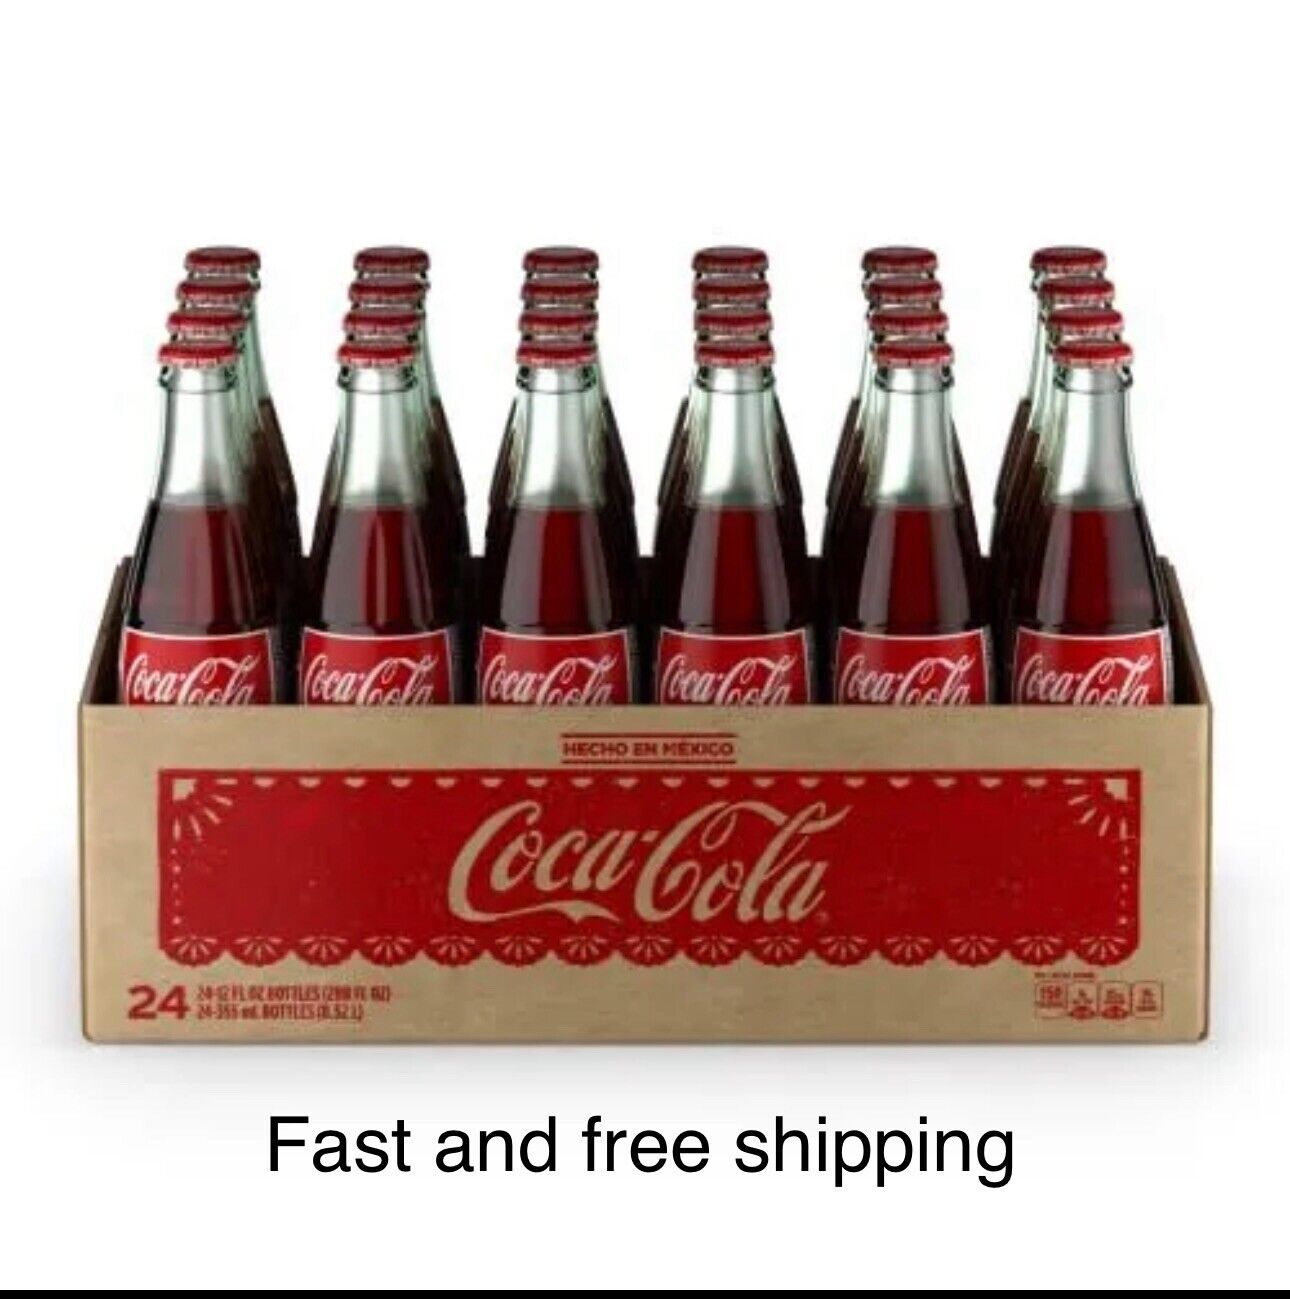 Mexican Coca-Cola Cane Sugar Import Glass Bottles 12oz Coke Hecho Mexico 24pack